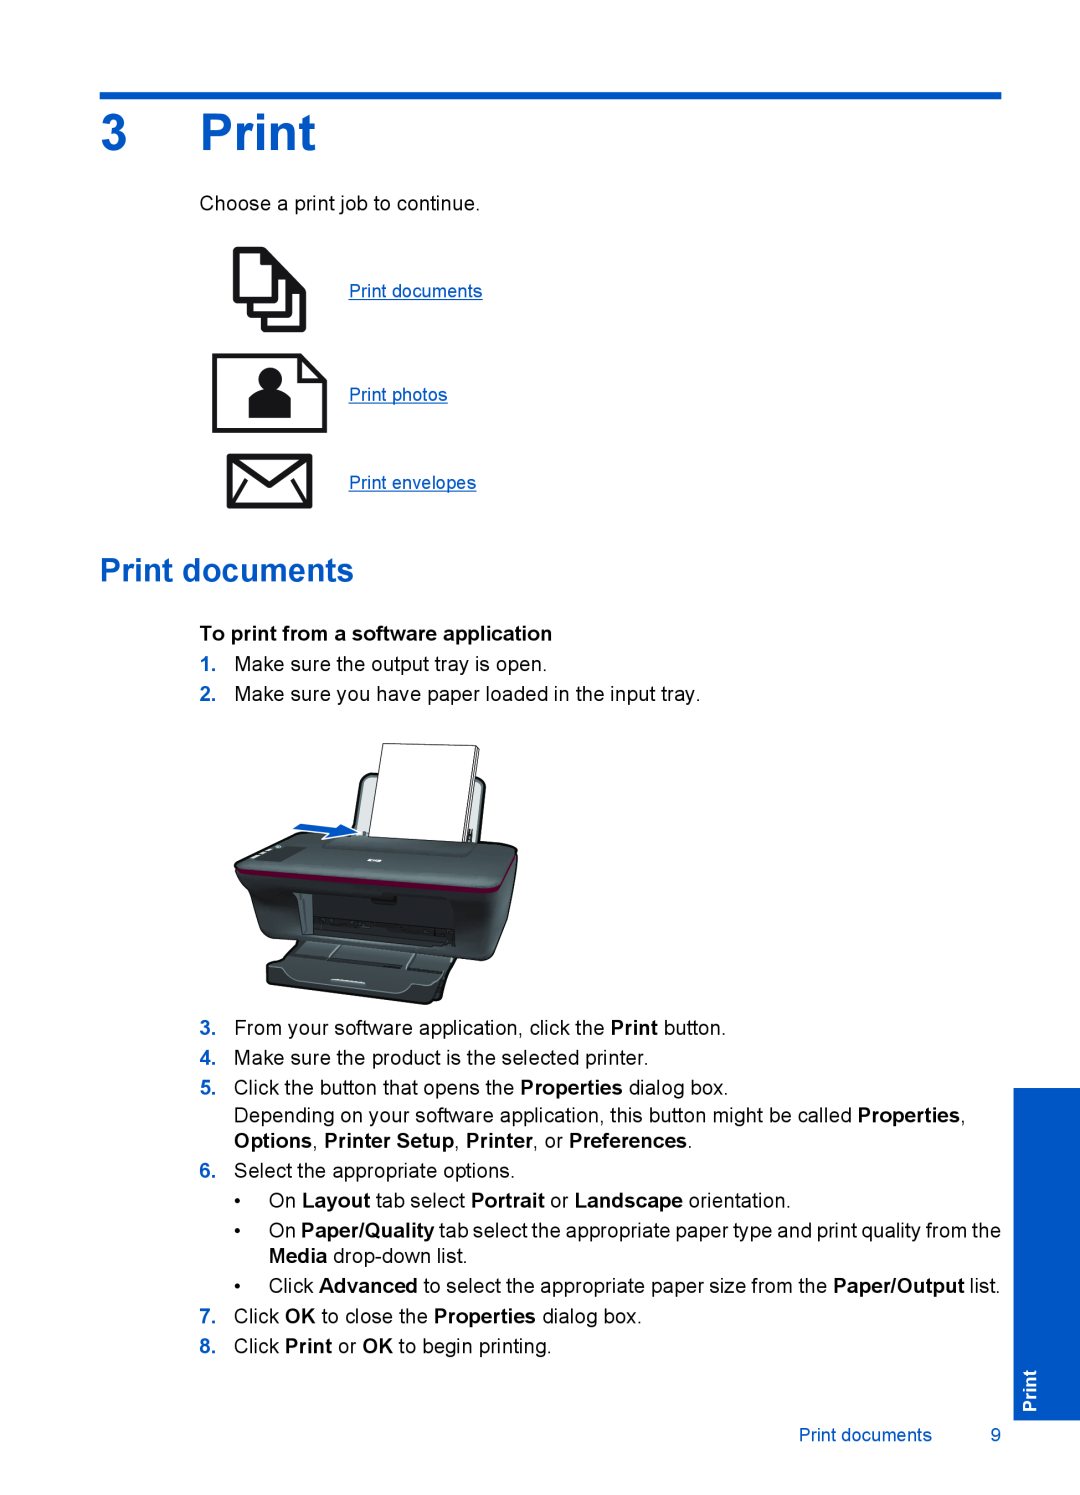 HP 1055 - J410e, 1051, 1050 - J410a, 1056 - J410a manual Print documents, To print from a software application 